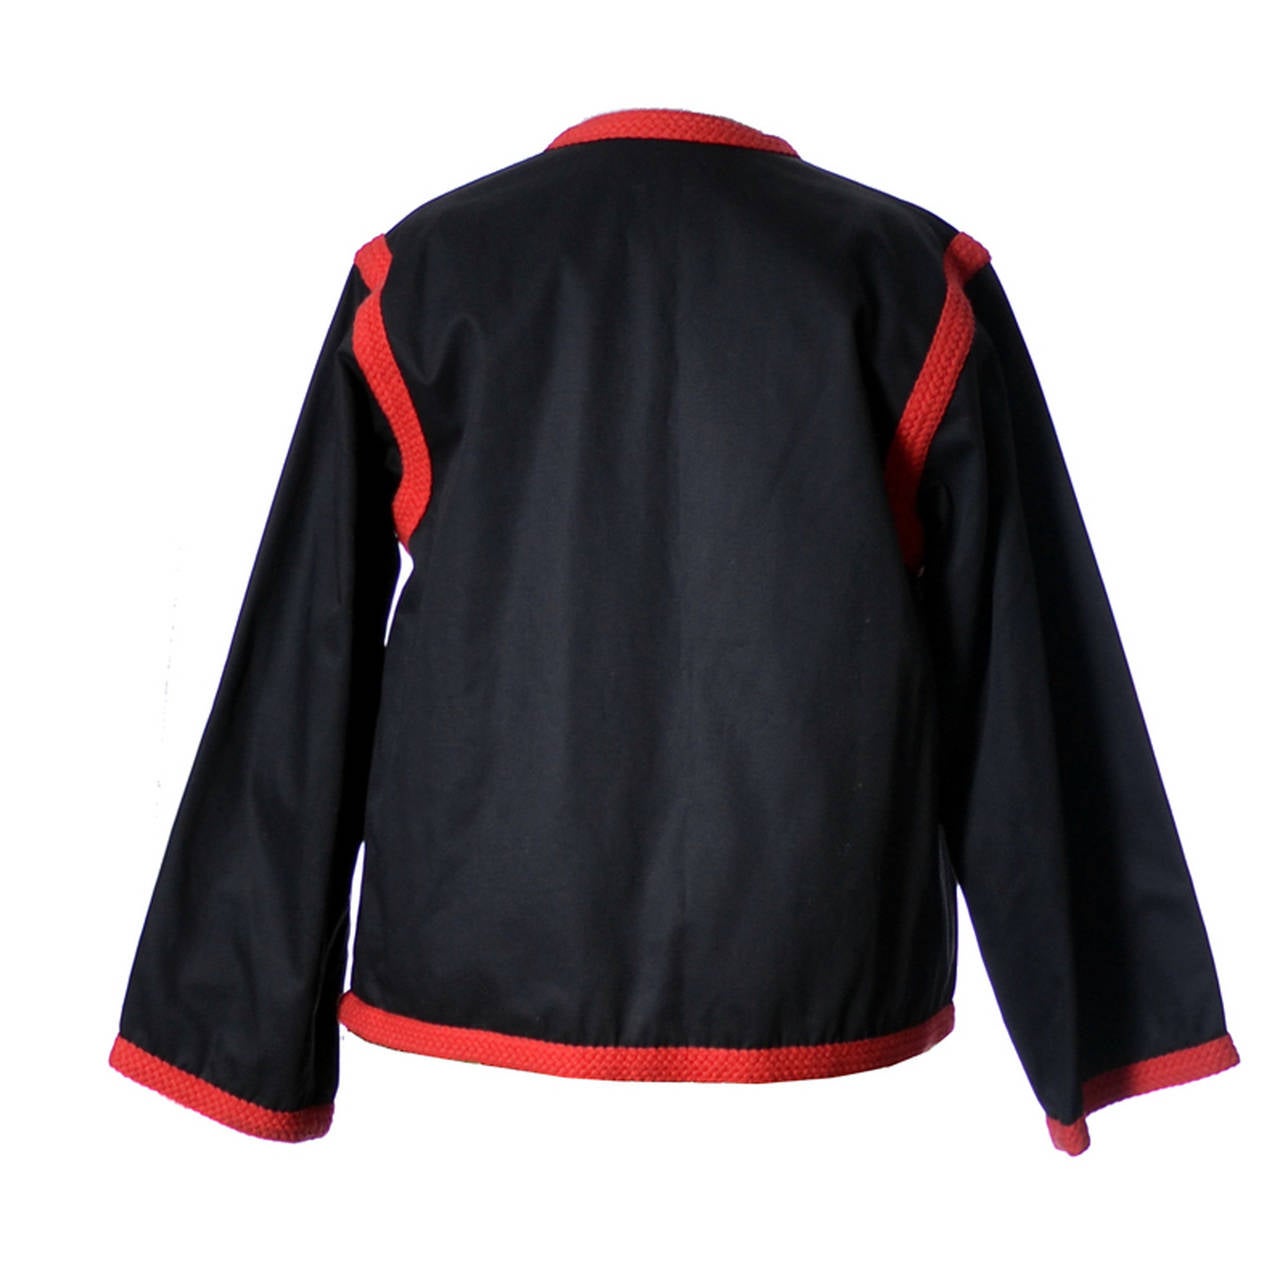 The 1970's vintage Yves Saint Laurent Rive Gauche Jacket is in black Cotton with red knit trim.   This pristine jacket  has a 38 inch bust and is 24 inches long from the nape of the neck. This wonderful vintage YSL jacket came from an estate that